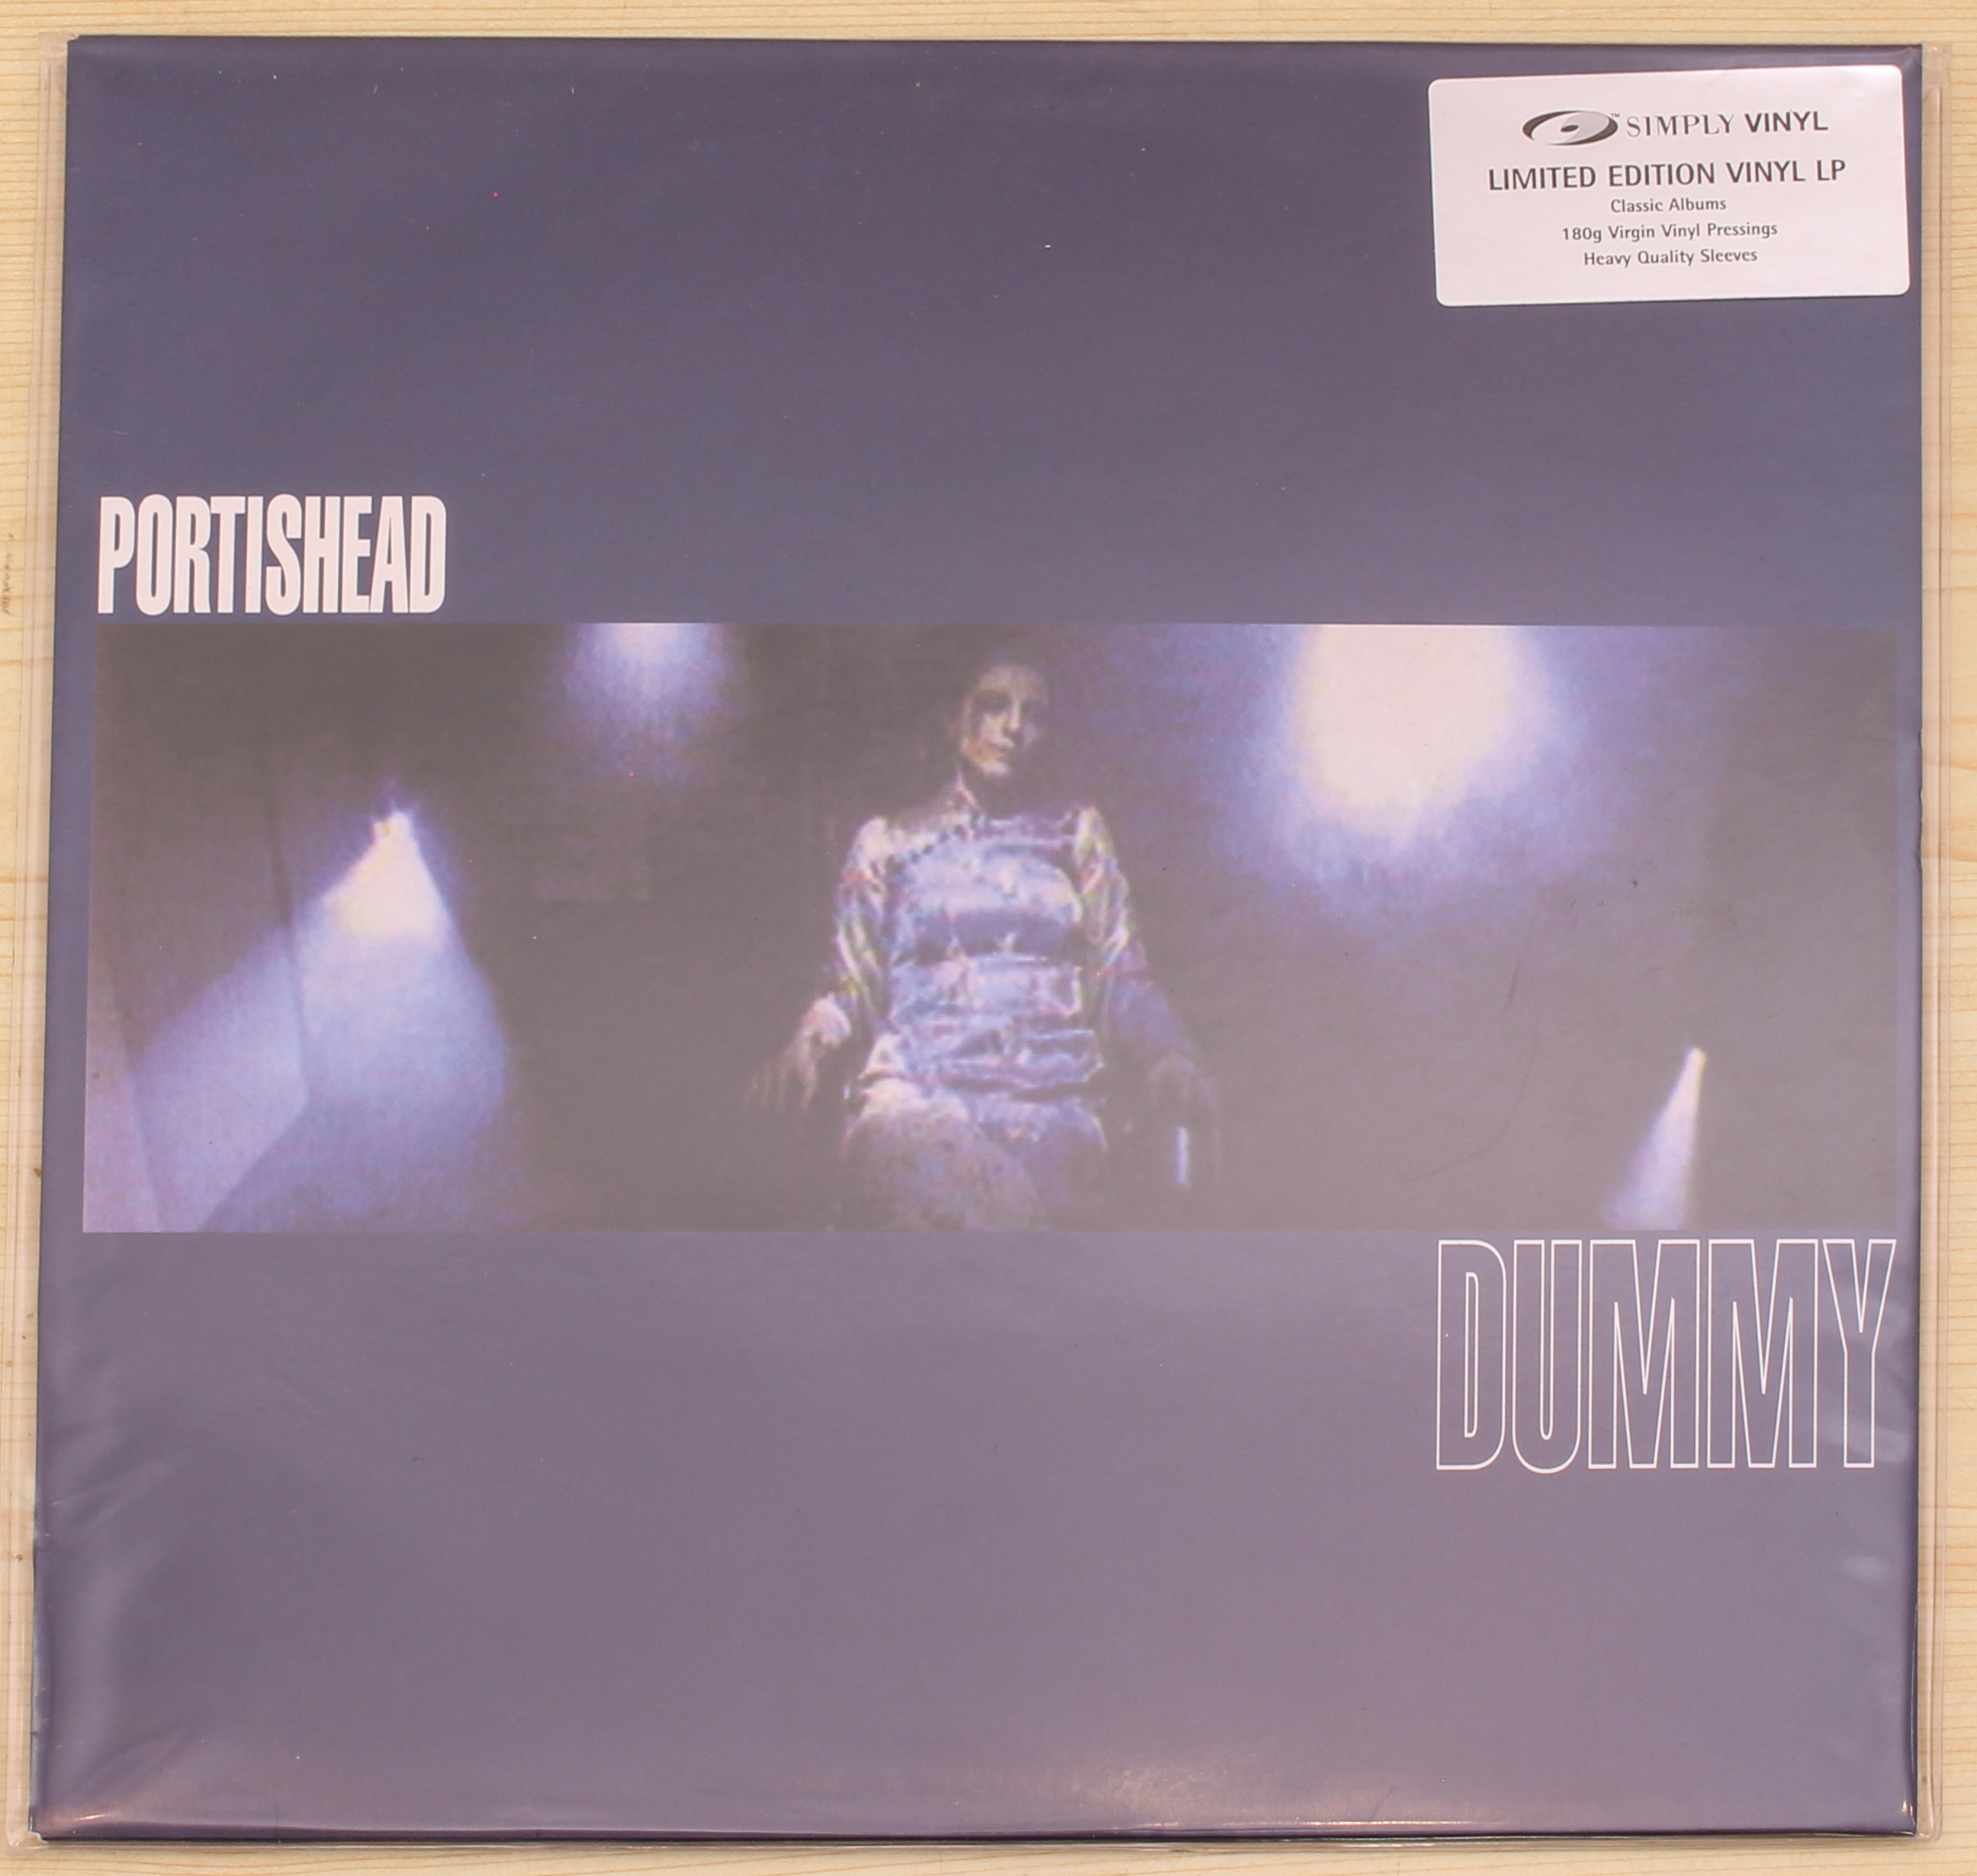 Portishead - Dummy (UK 2000 limited edition re-issue Simply VInyl SVLP 162 sealed).